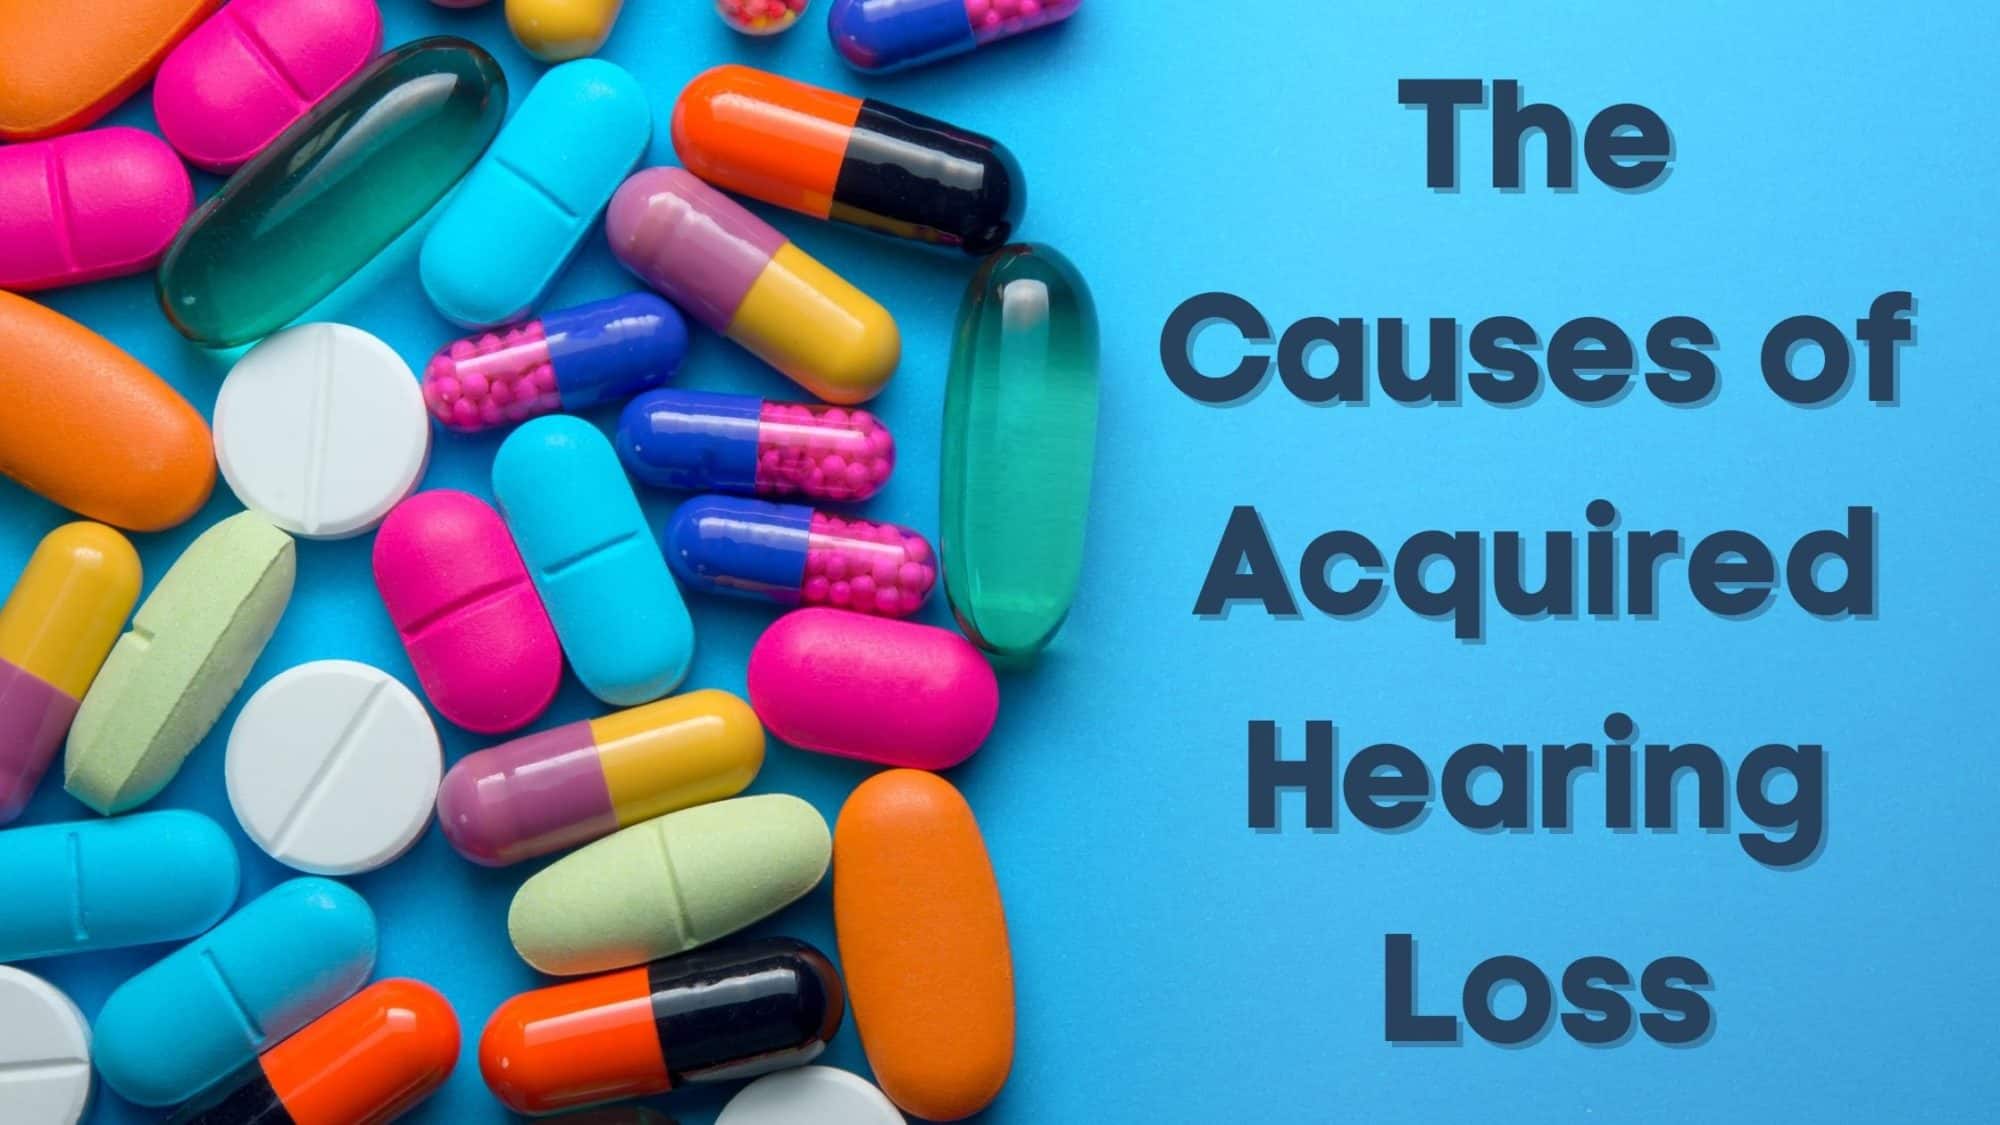 The Causes of Acquired Hearing Loss